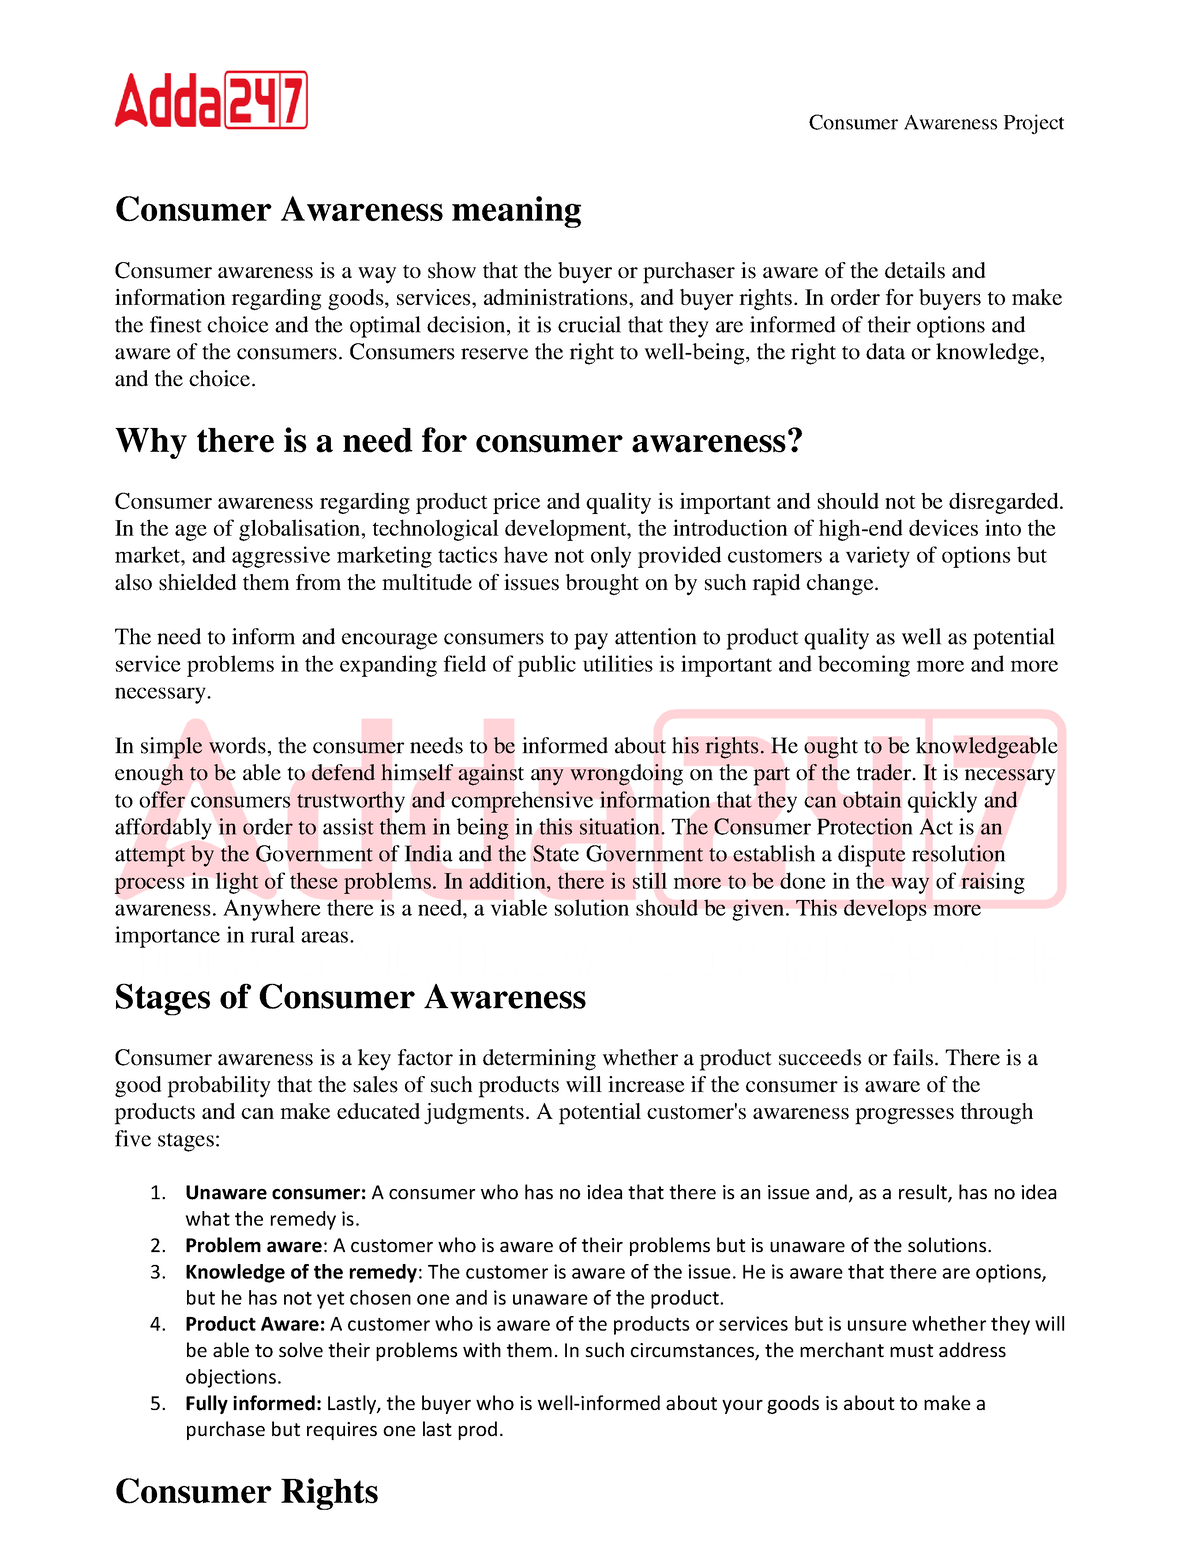 case study on consumer awareness for project